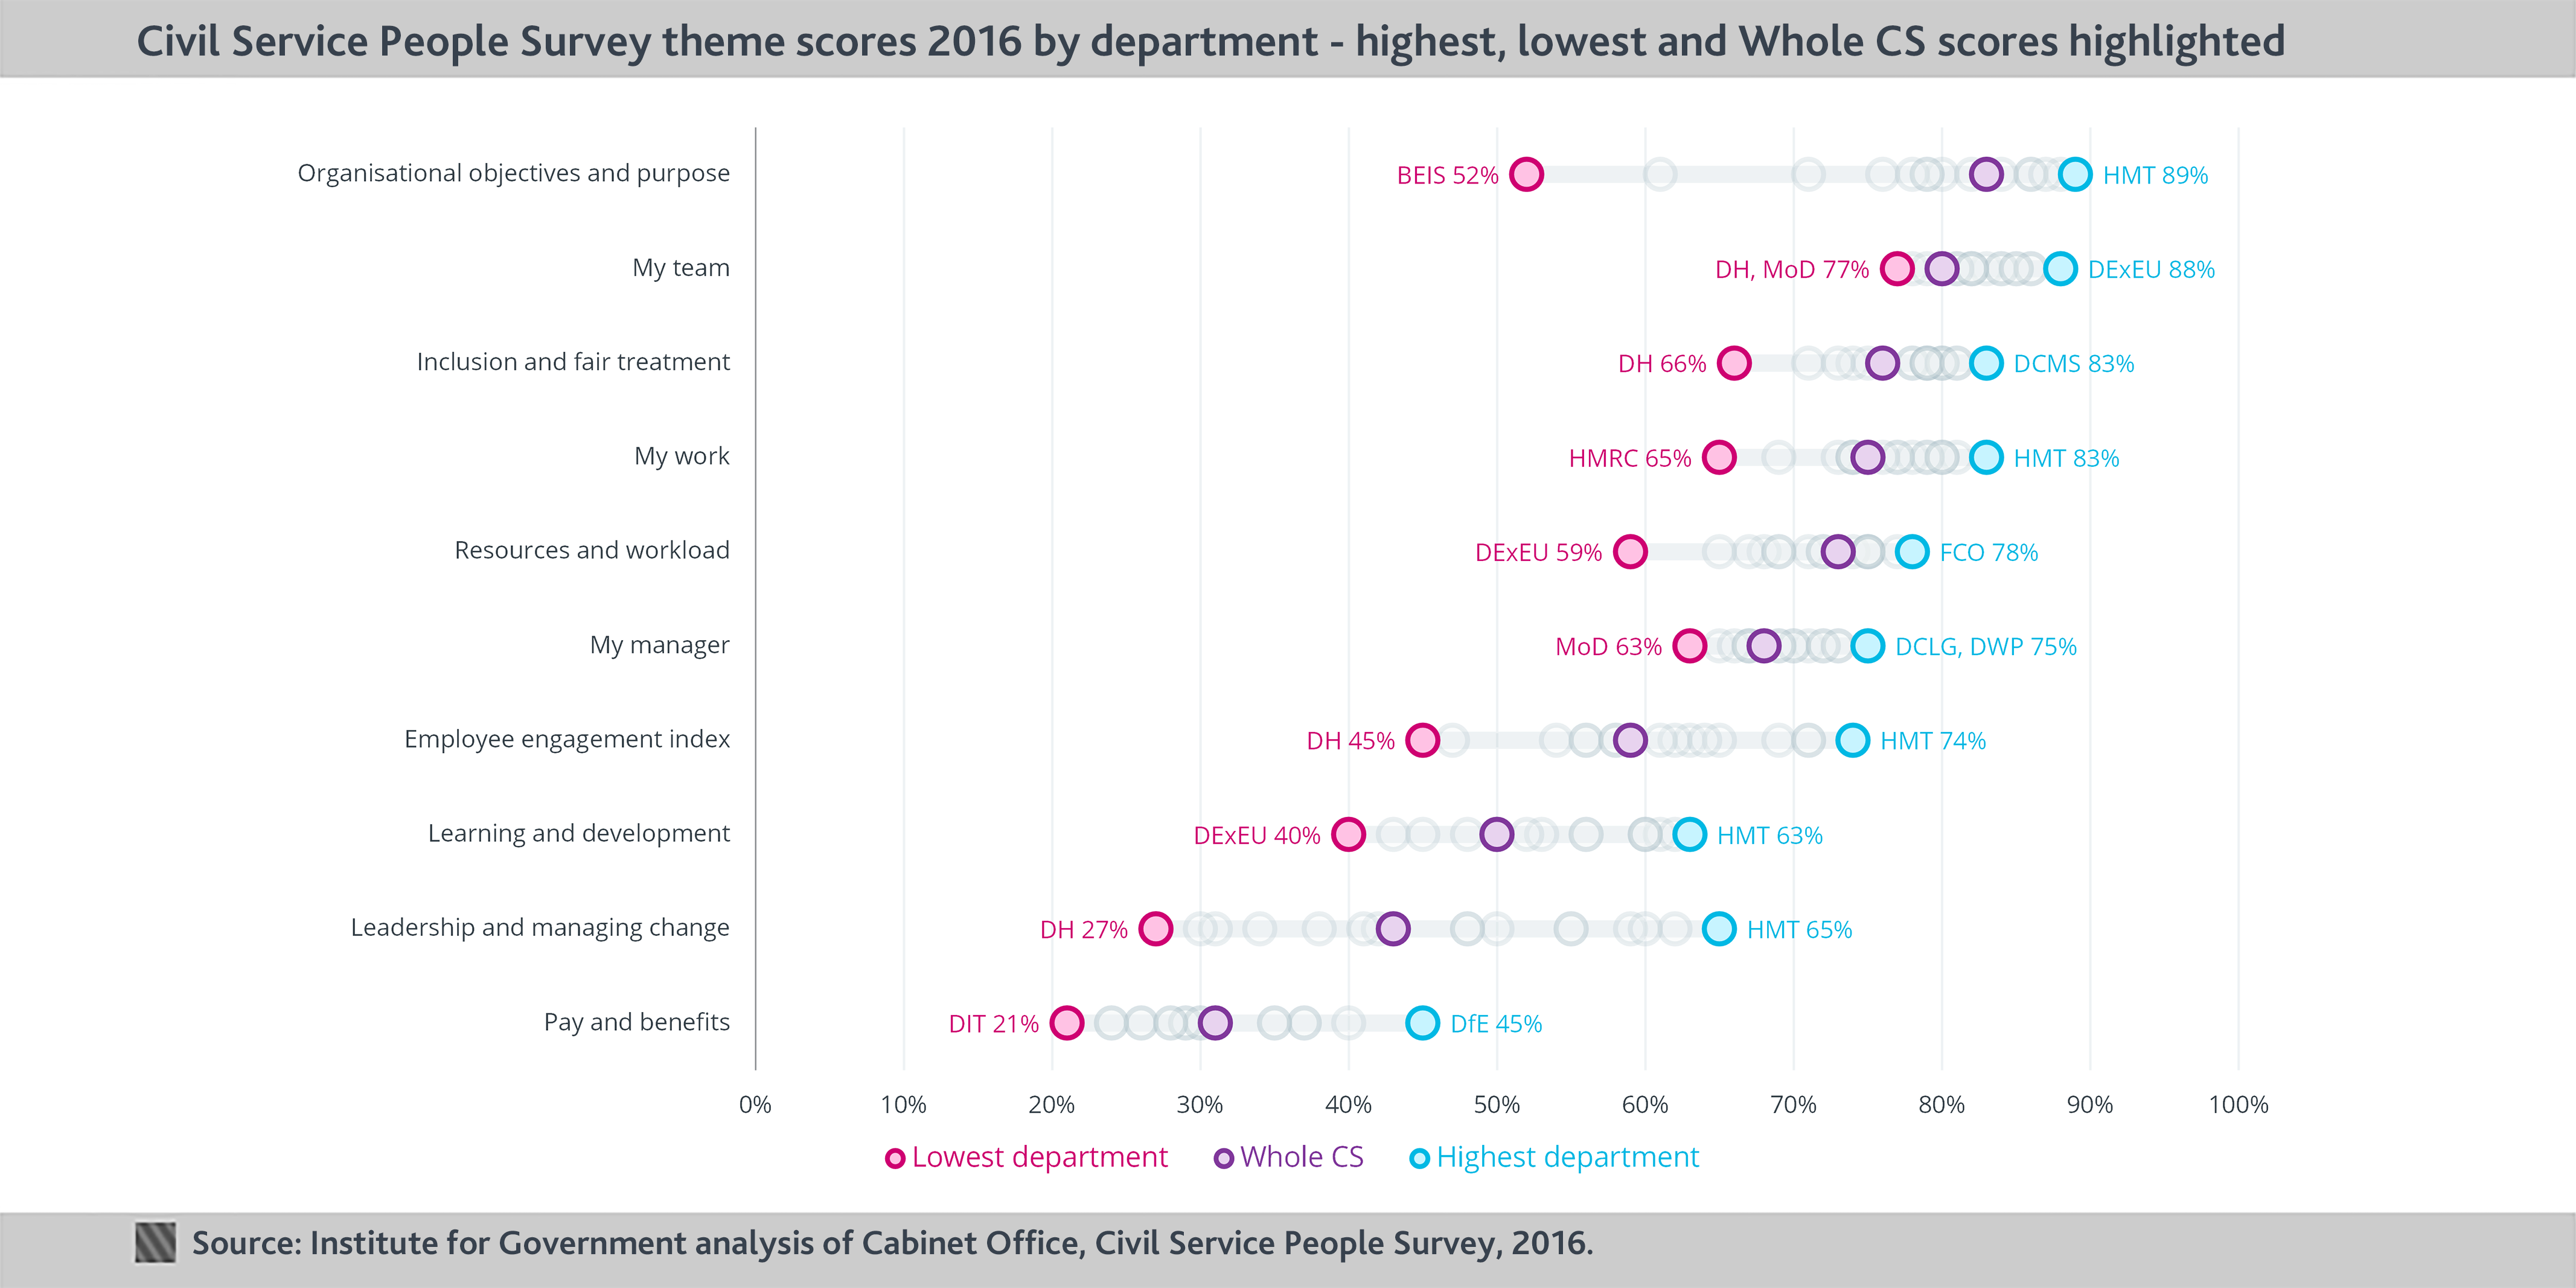 Departmental scores on engagement index and themes, 2016